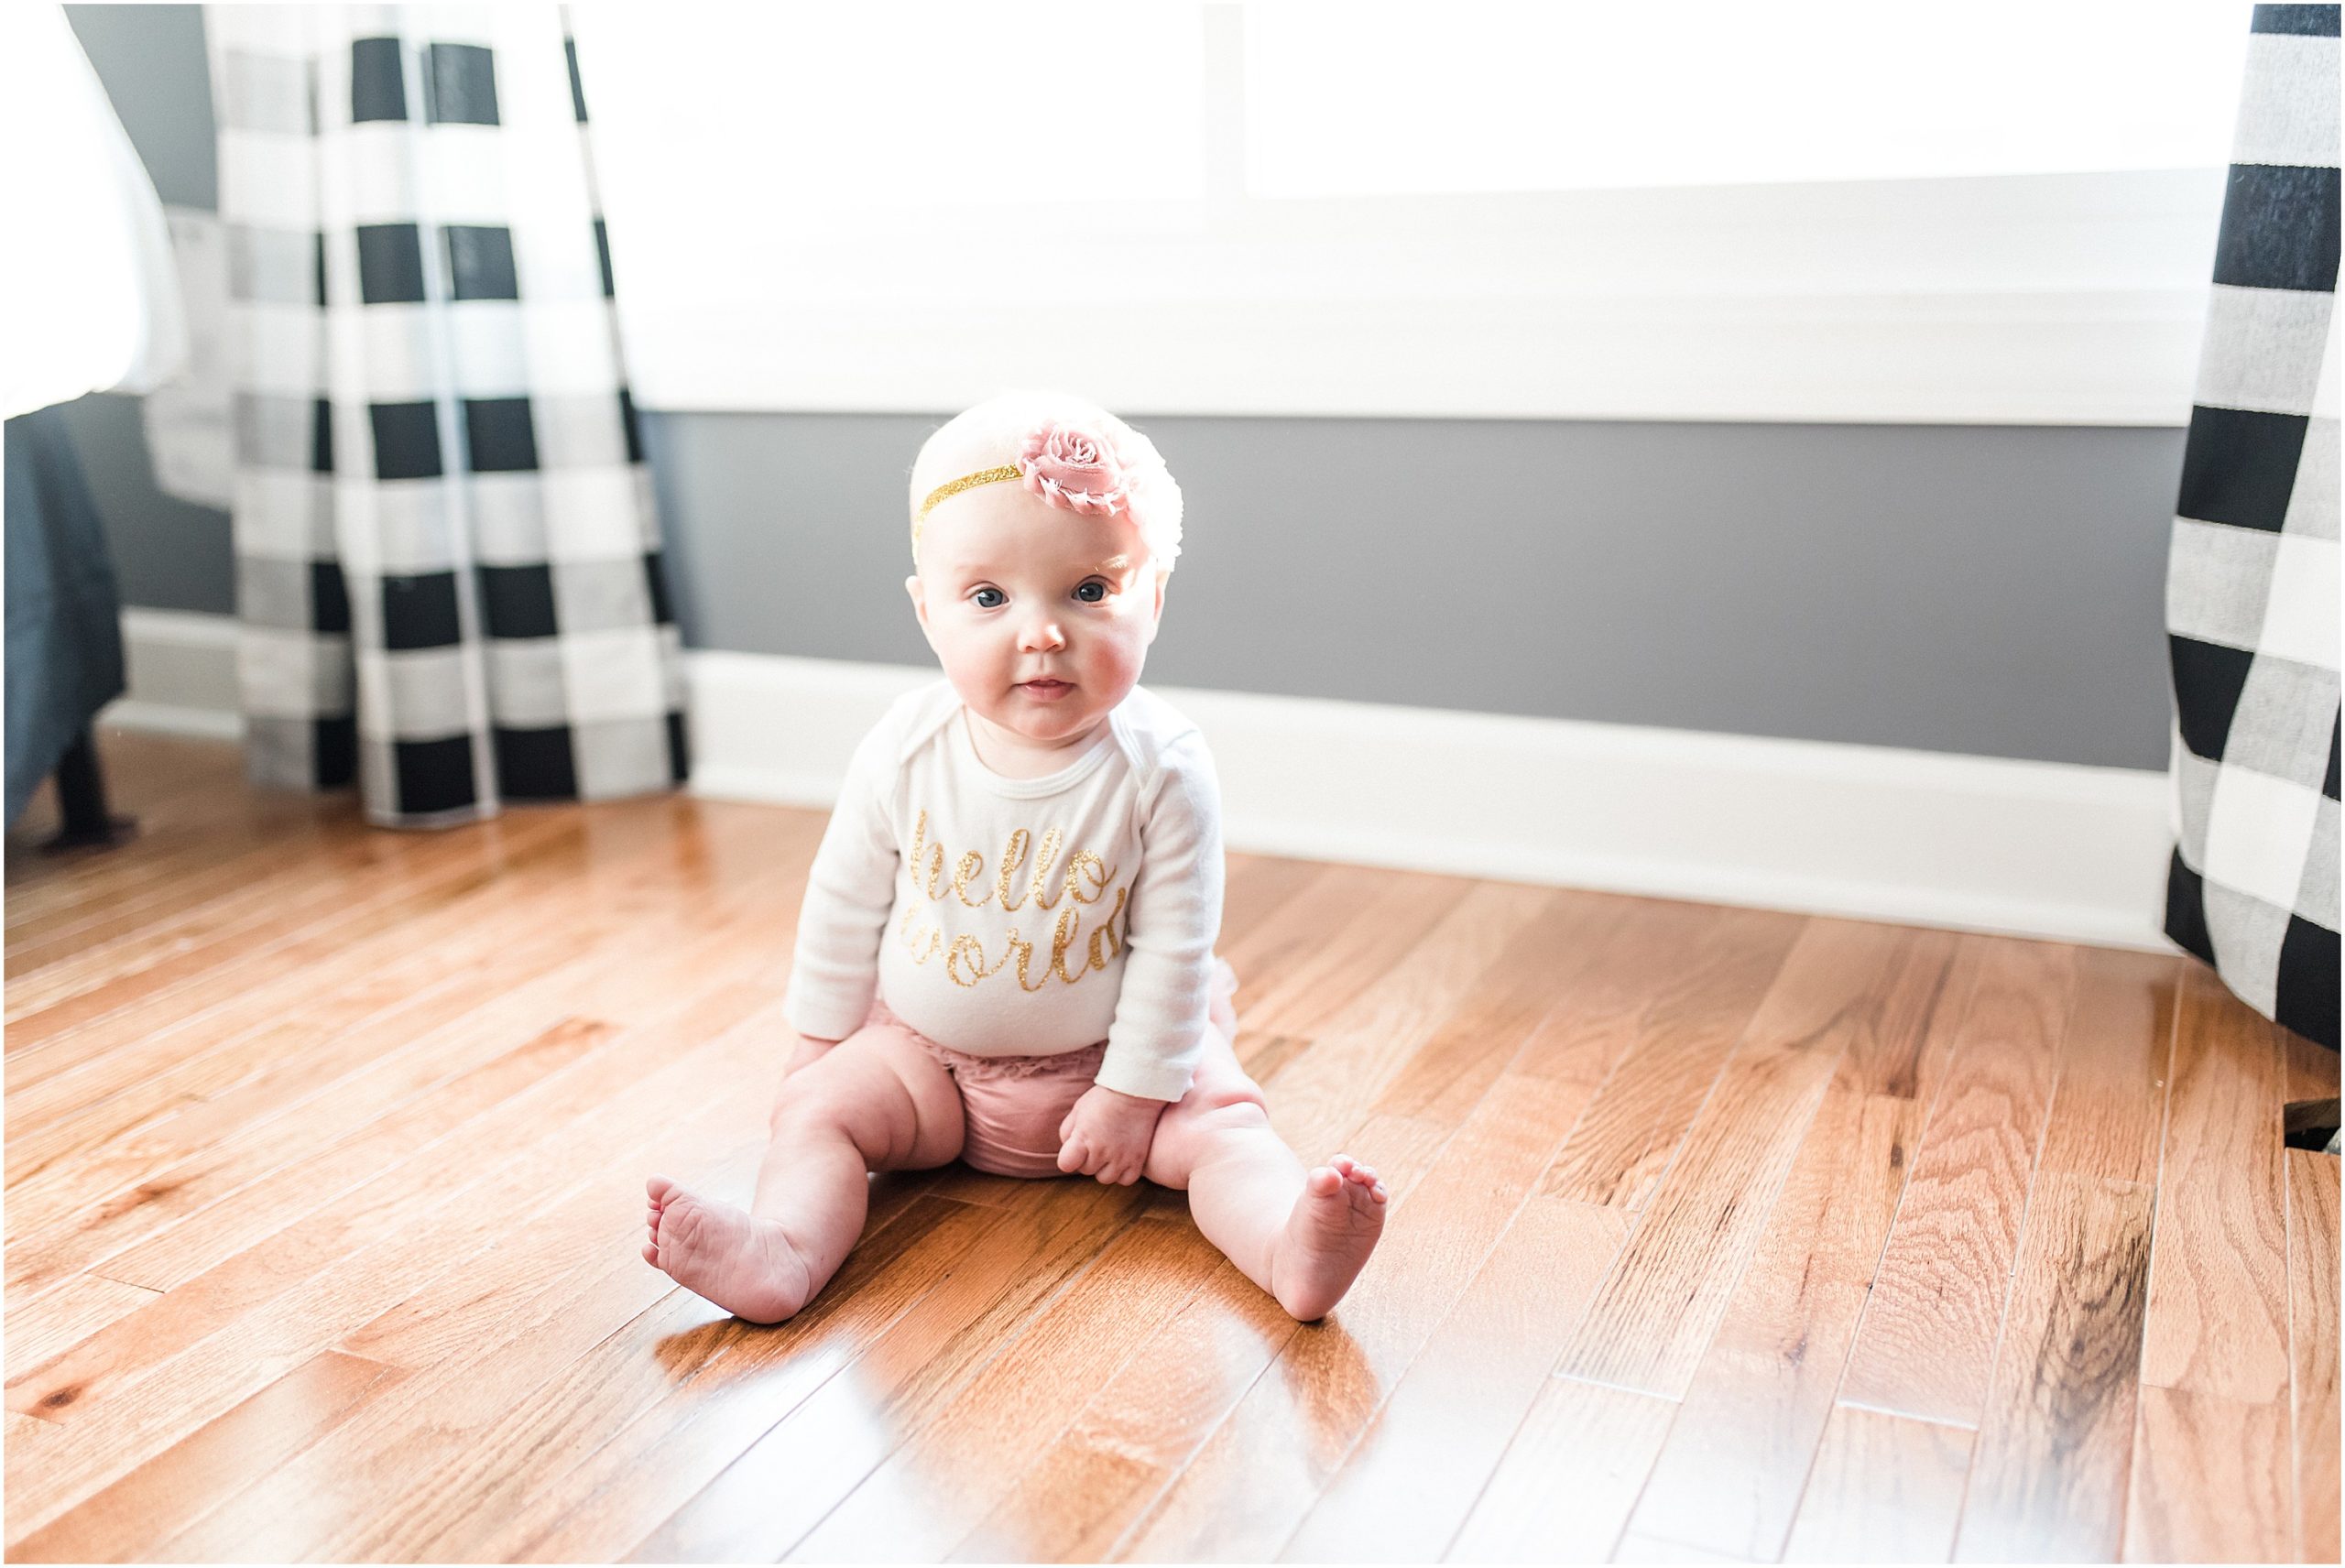 6 month old girl sitting on hardwood floors in her home